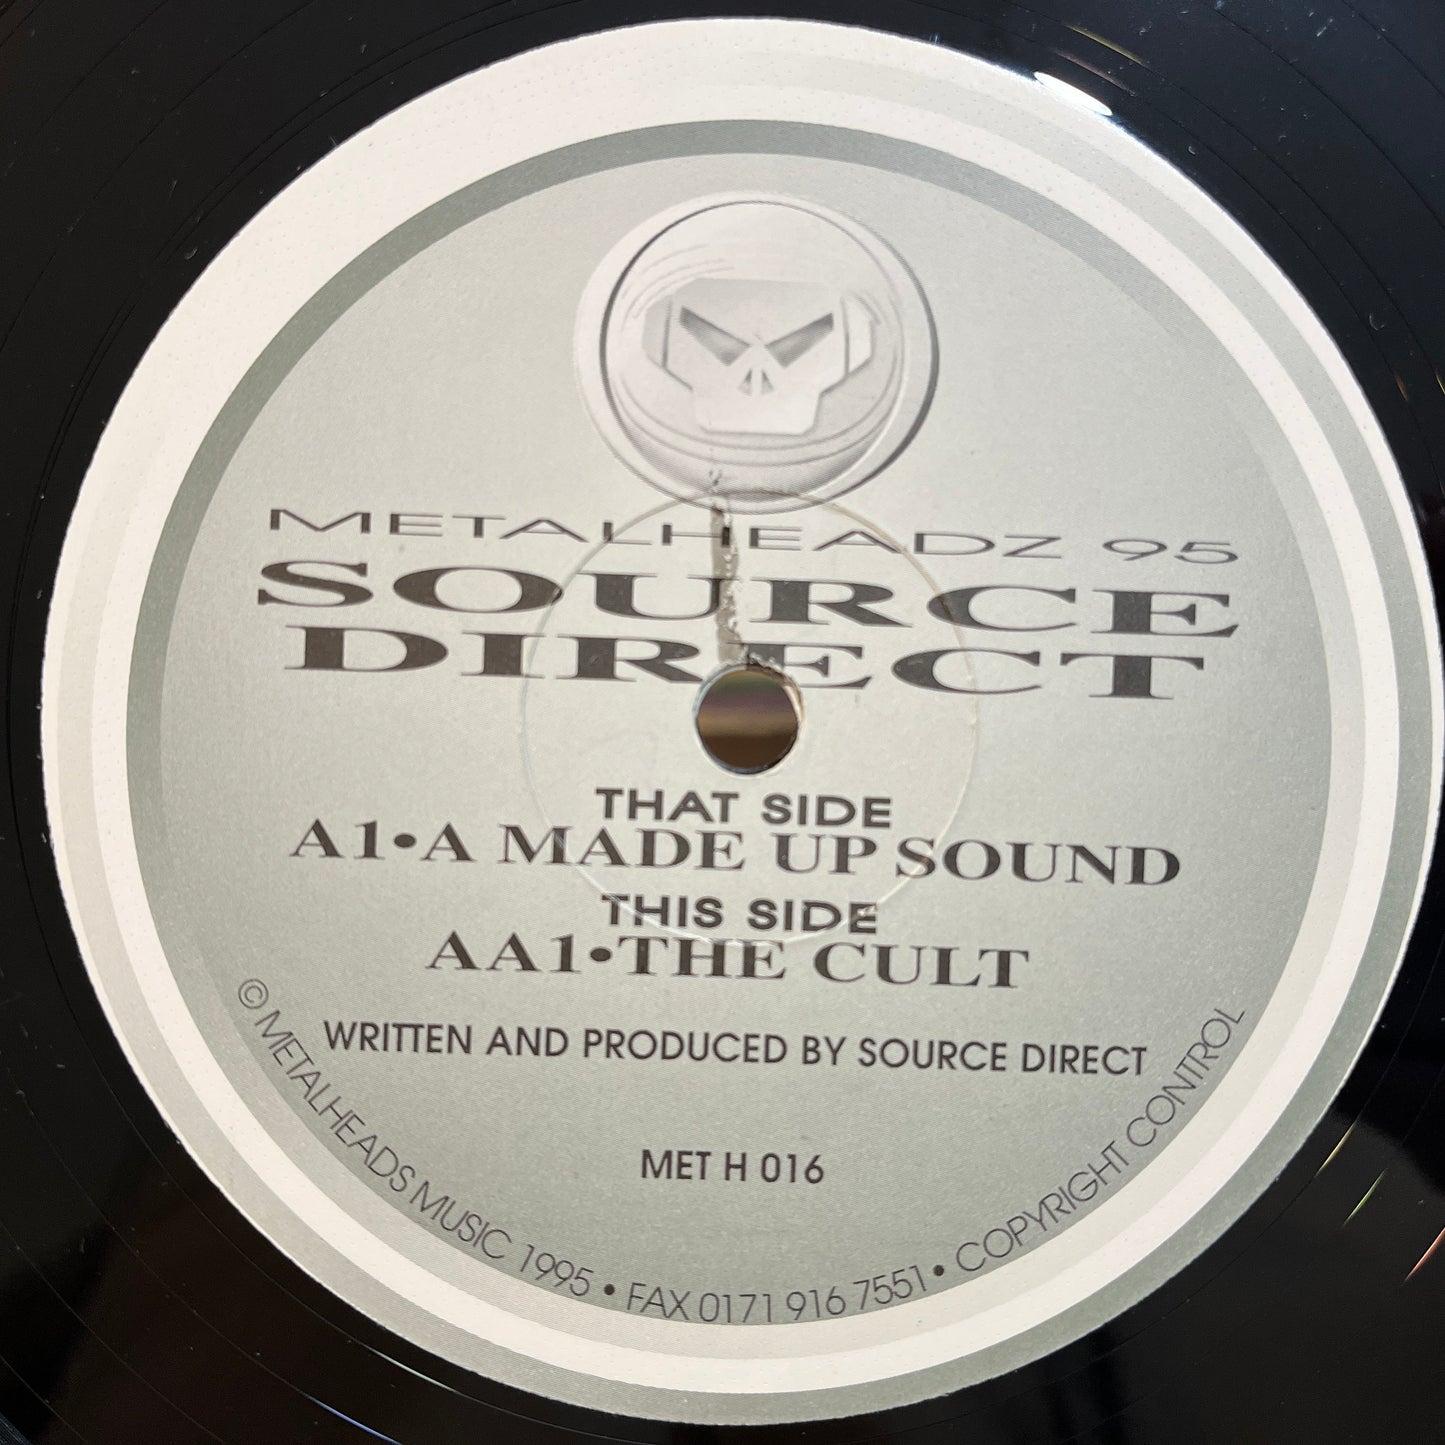 Source Direct – A Made Up Sound / The Cult